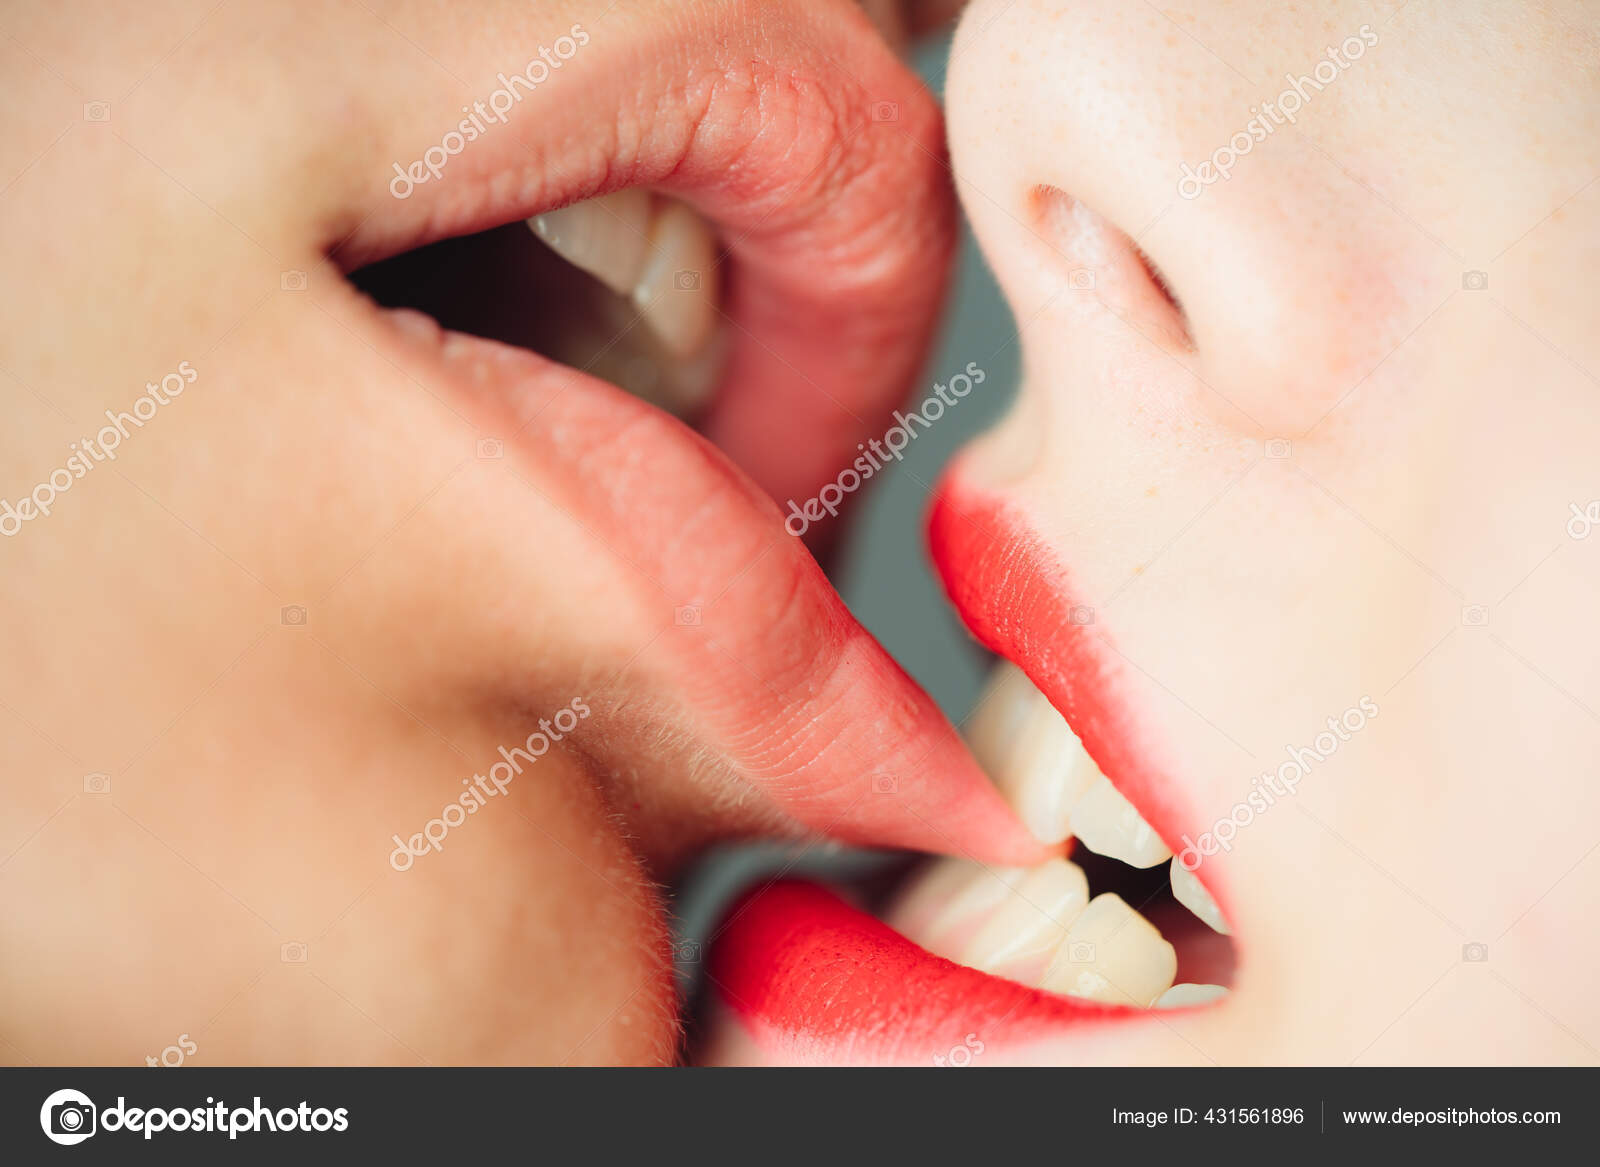 Lips to lips kissing